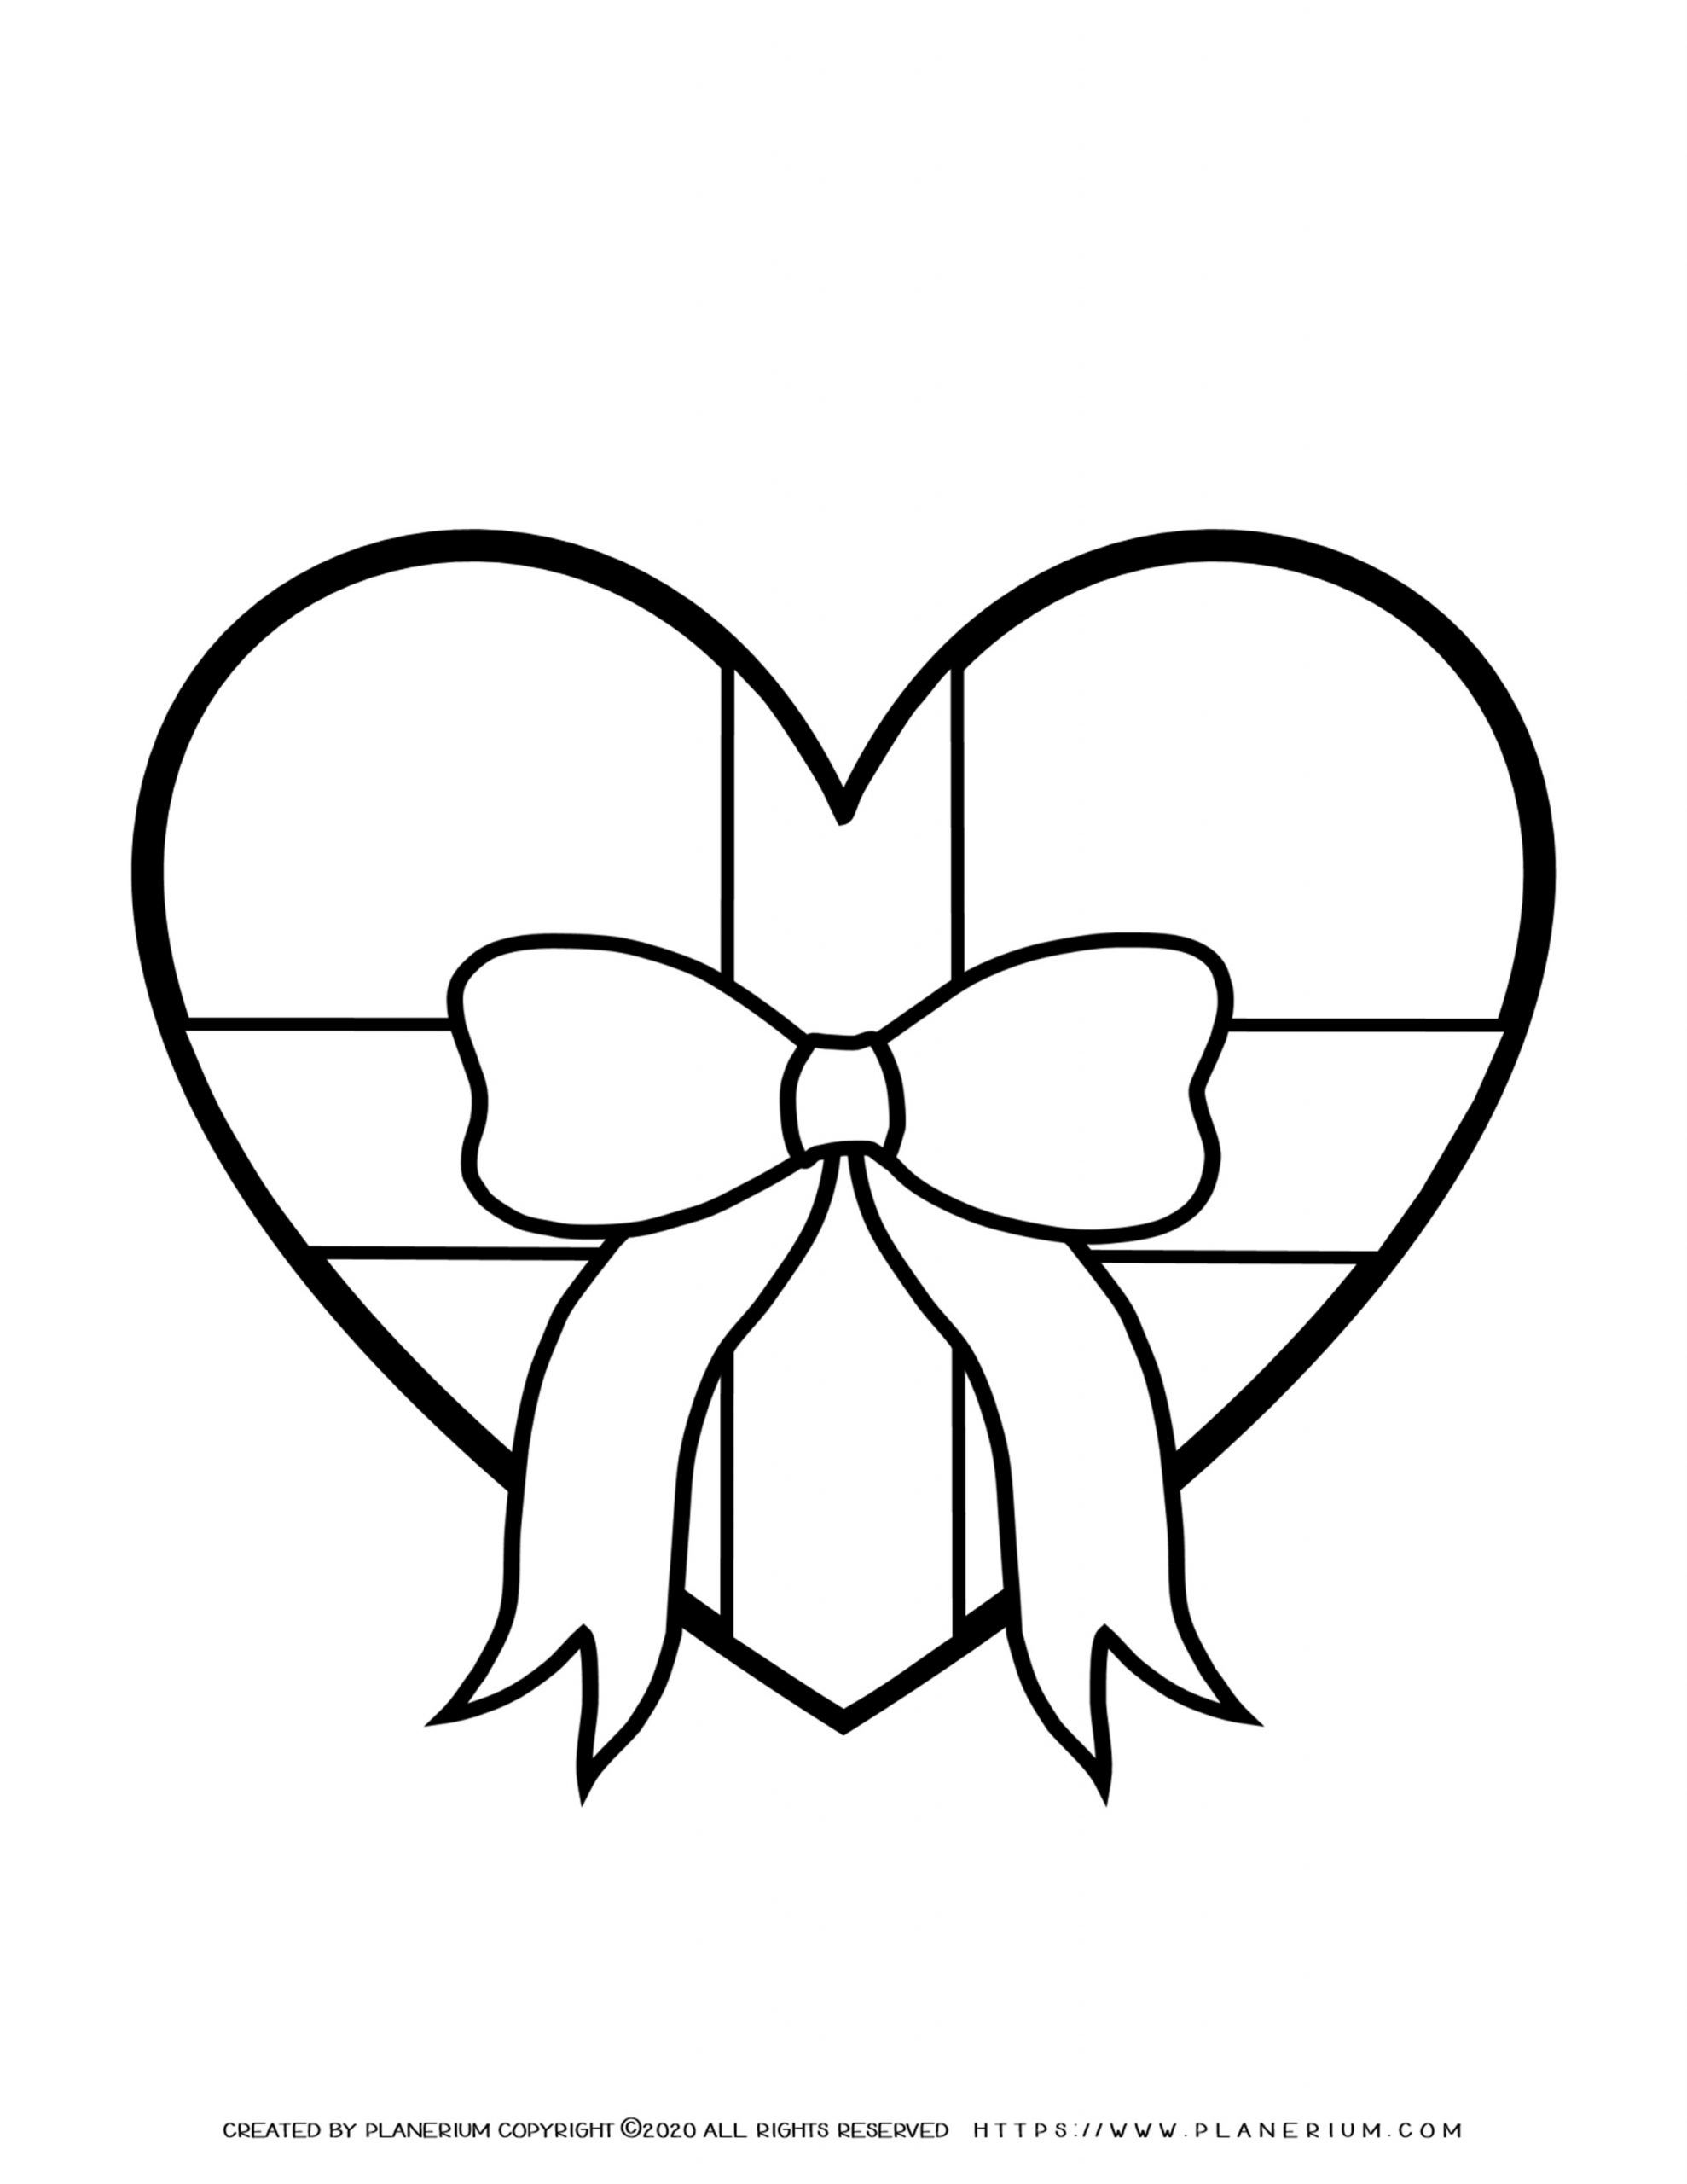 Mother's day - Coloring Page - Heart Present | Planerium